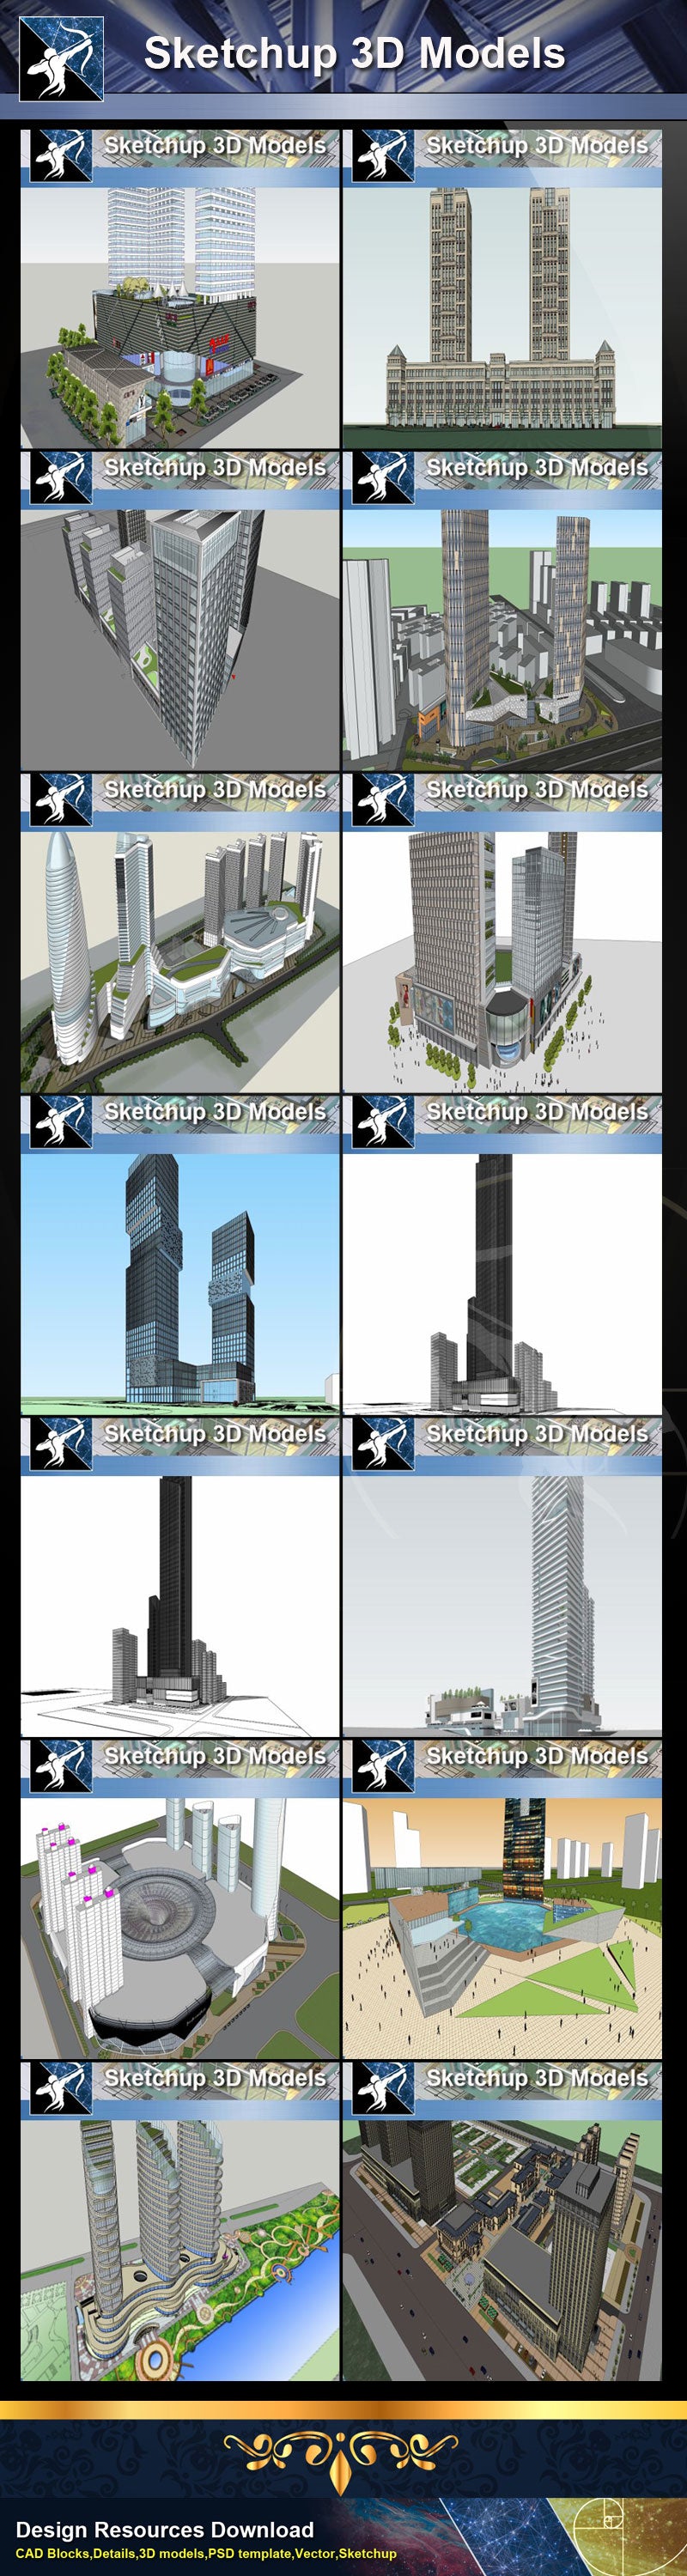 ★★Best 37 Types of Commercial,Shopping Mall Sketchup 3D Models Collection(Recommanded!!)